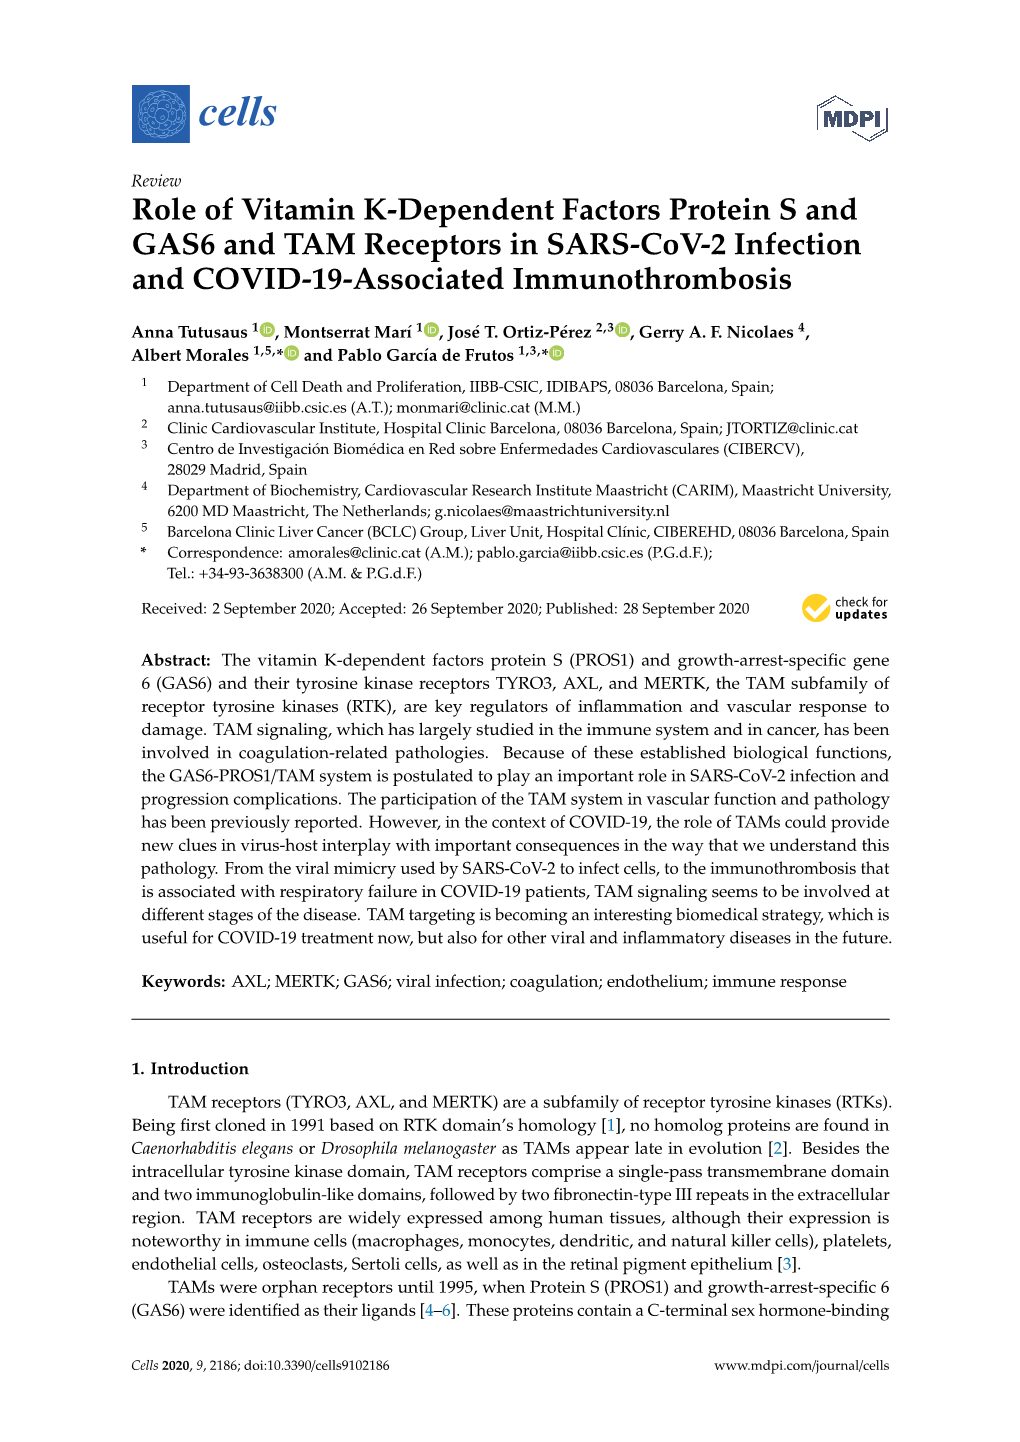 Role of Vitamin K-Dependent Factors Protein S and GAS6 and TAM Receptors in SARS-Cov-2 Infection and COVID-19-Associated Immunothrombosis